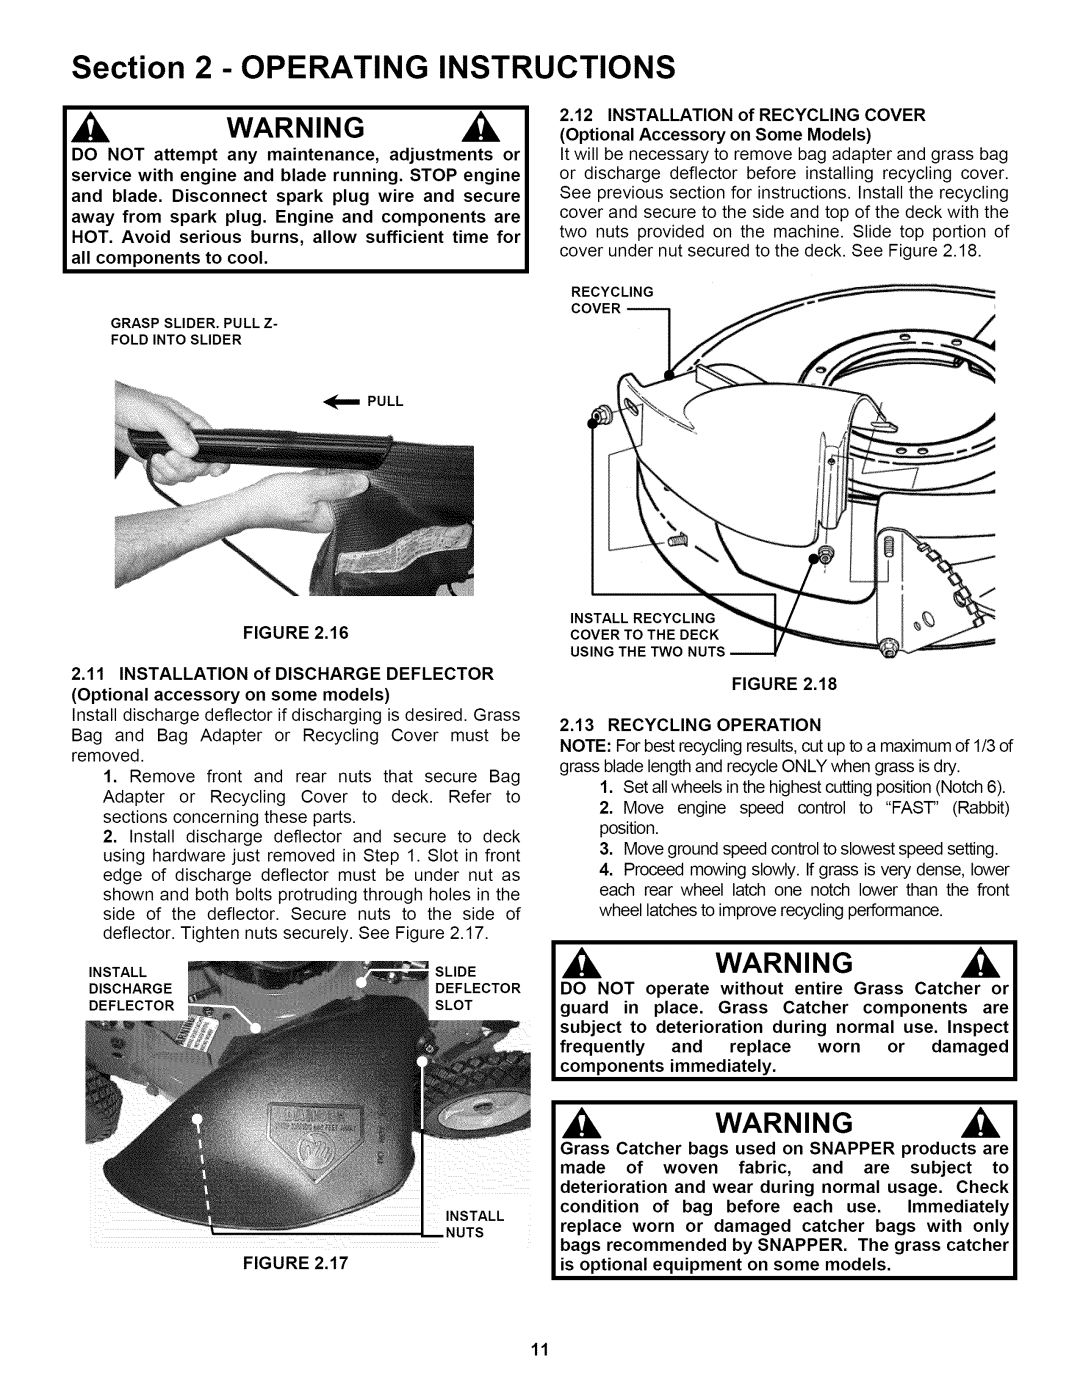 Snapper P216518B important safety instructions Operatinginstructions, Figure 